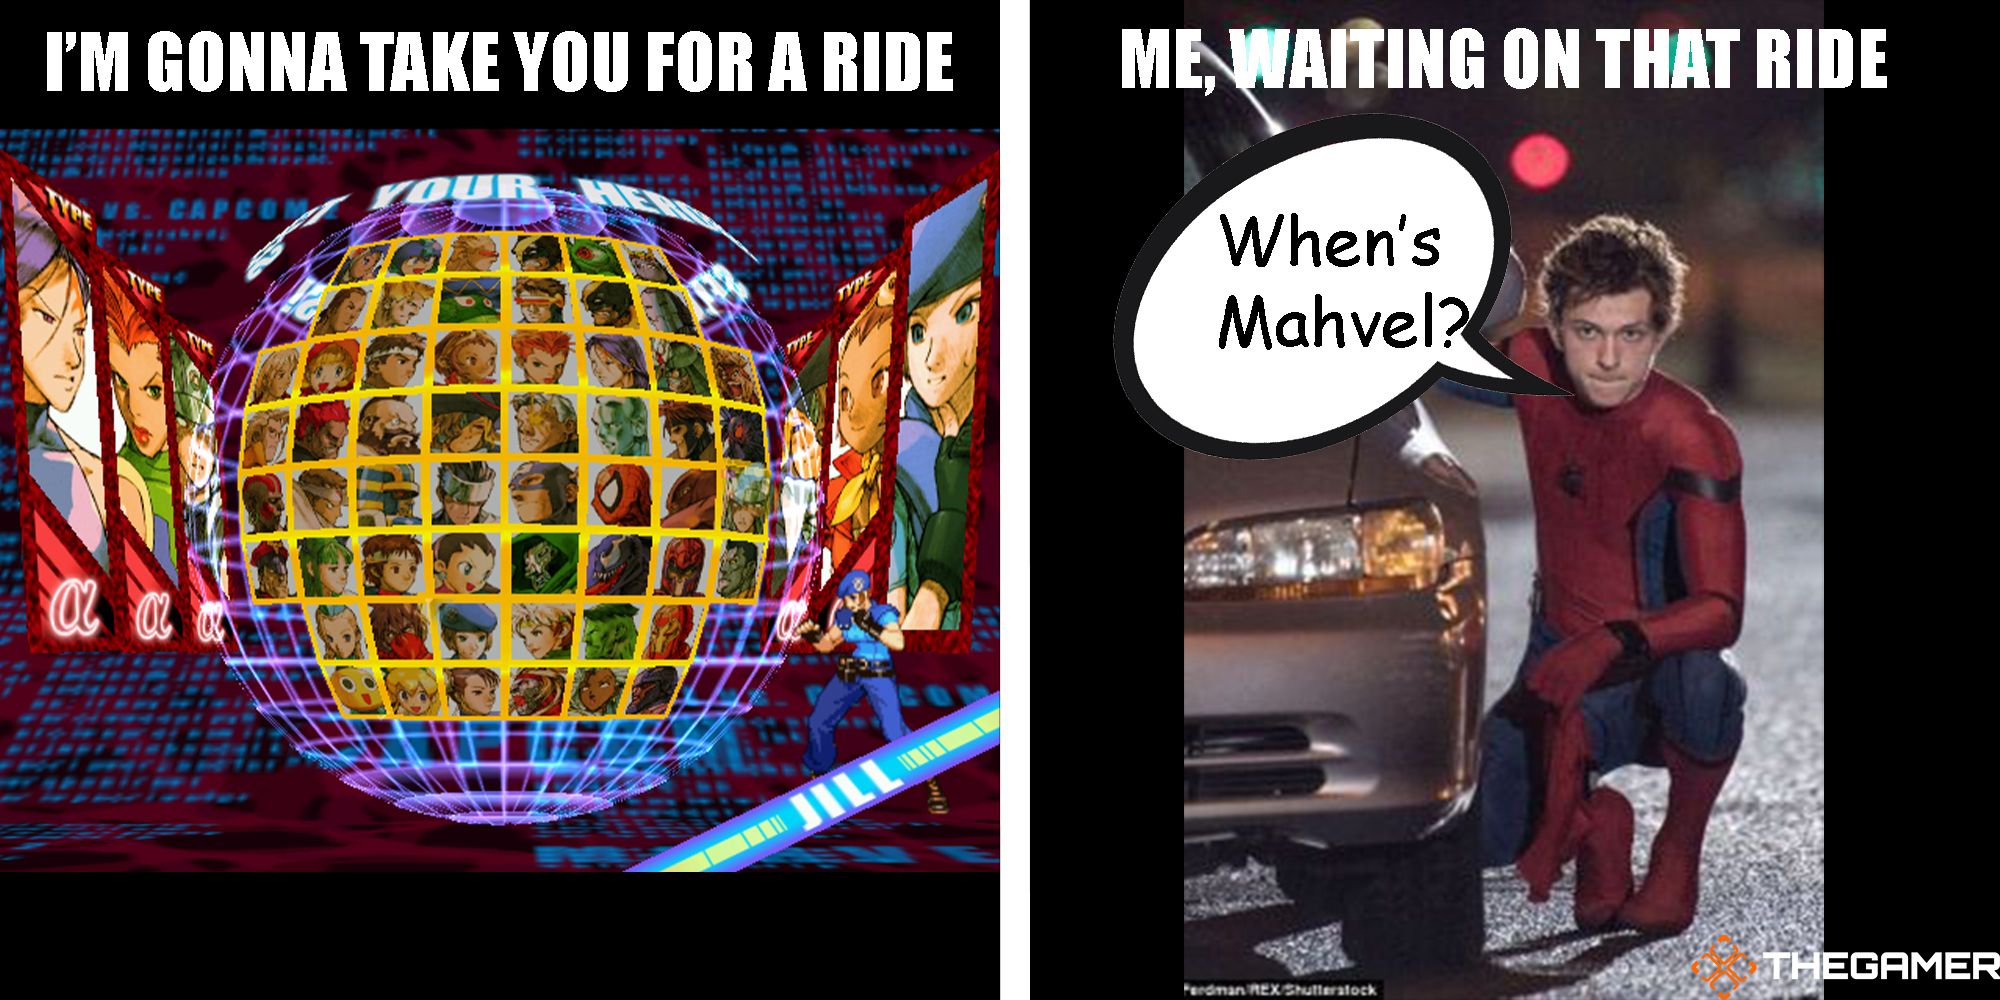 [Panel 1] The MvC2 Character Select screen with the caption, "I'm Gonna Take You For A Ride." [Panel 2] Tom Holland's Spider Man waits next to a car and asks "When's Mahvel?" and the caption says, "Me, Waiting On That Ride."